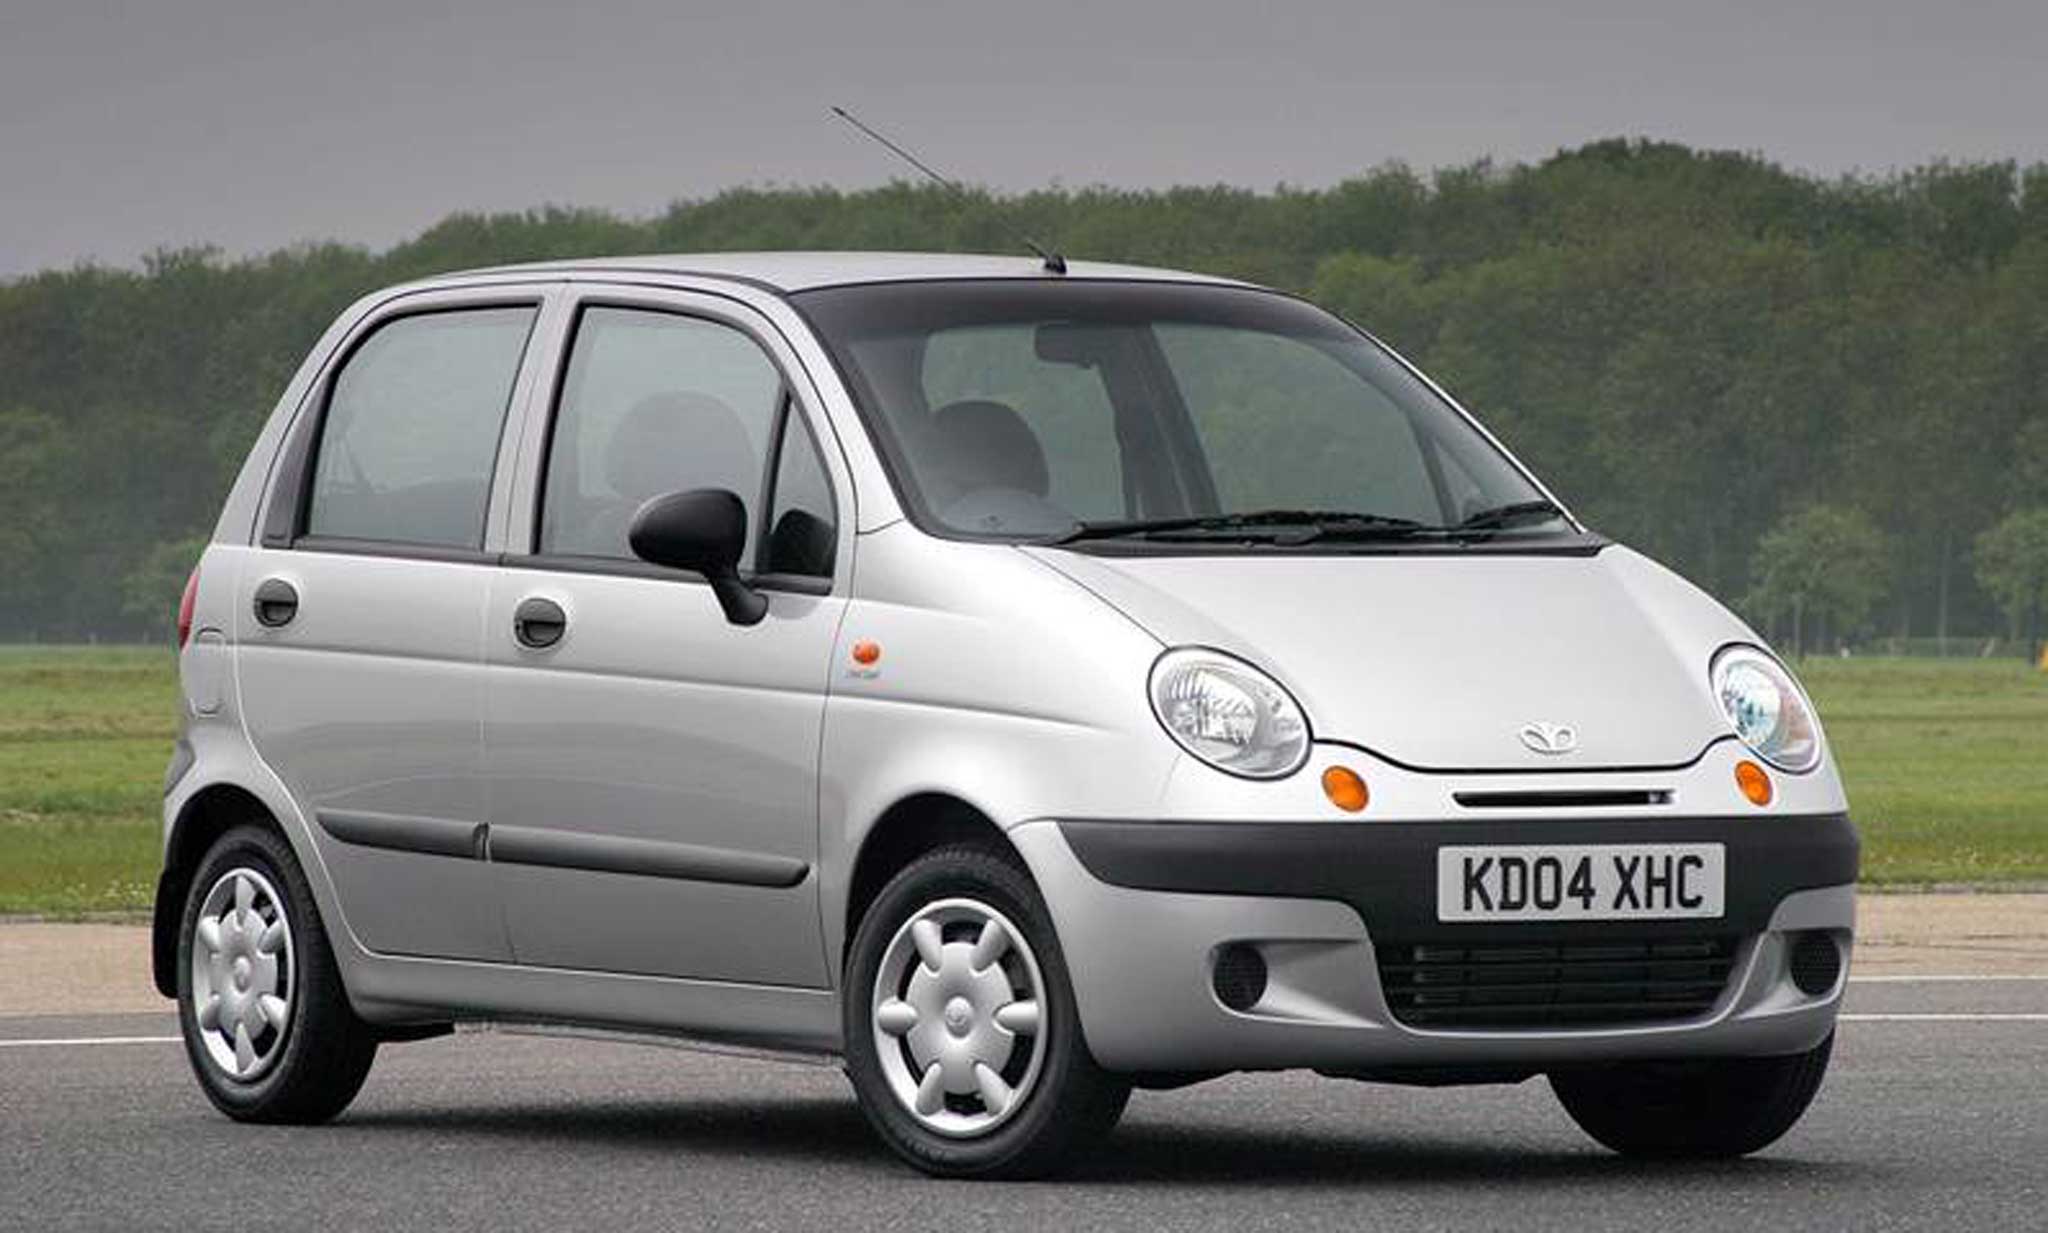 Economical: The Daewoo Matiz is perfect for short journeys